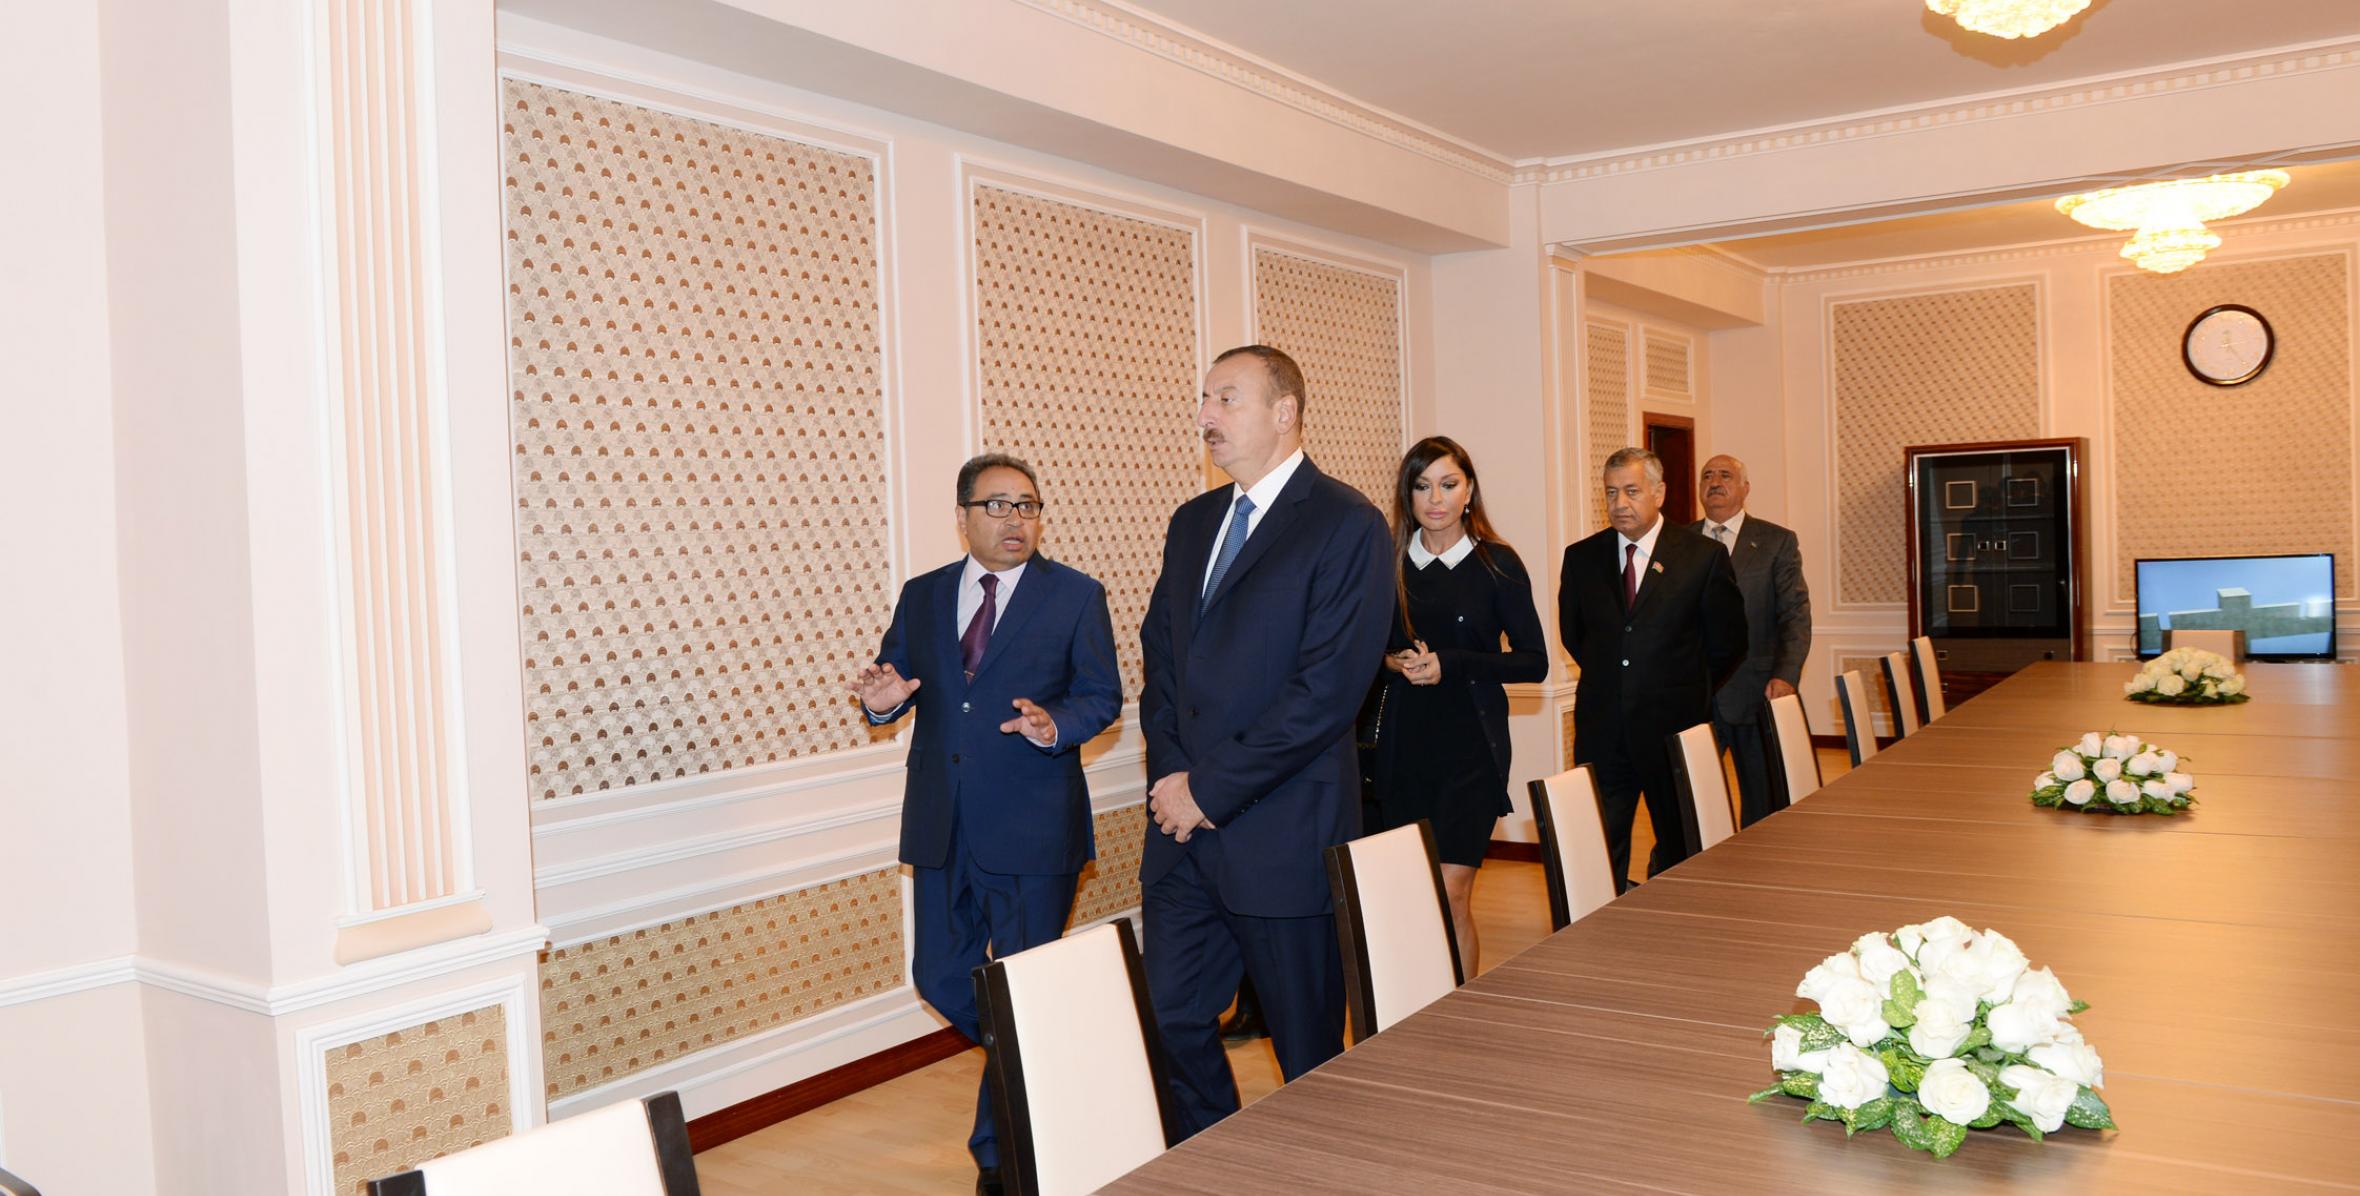 As part of a visit to Guba, Ilham Aliyev attended the opening of a training and recreation center of Baku State University